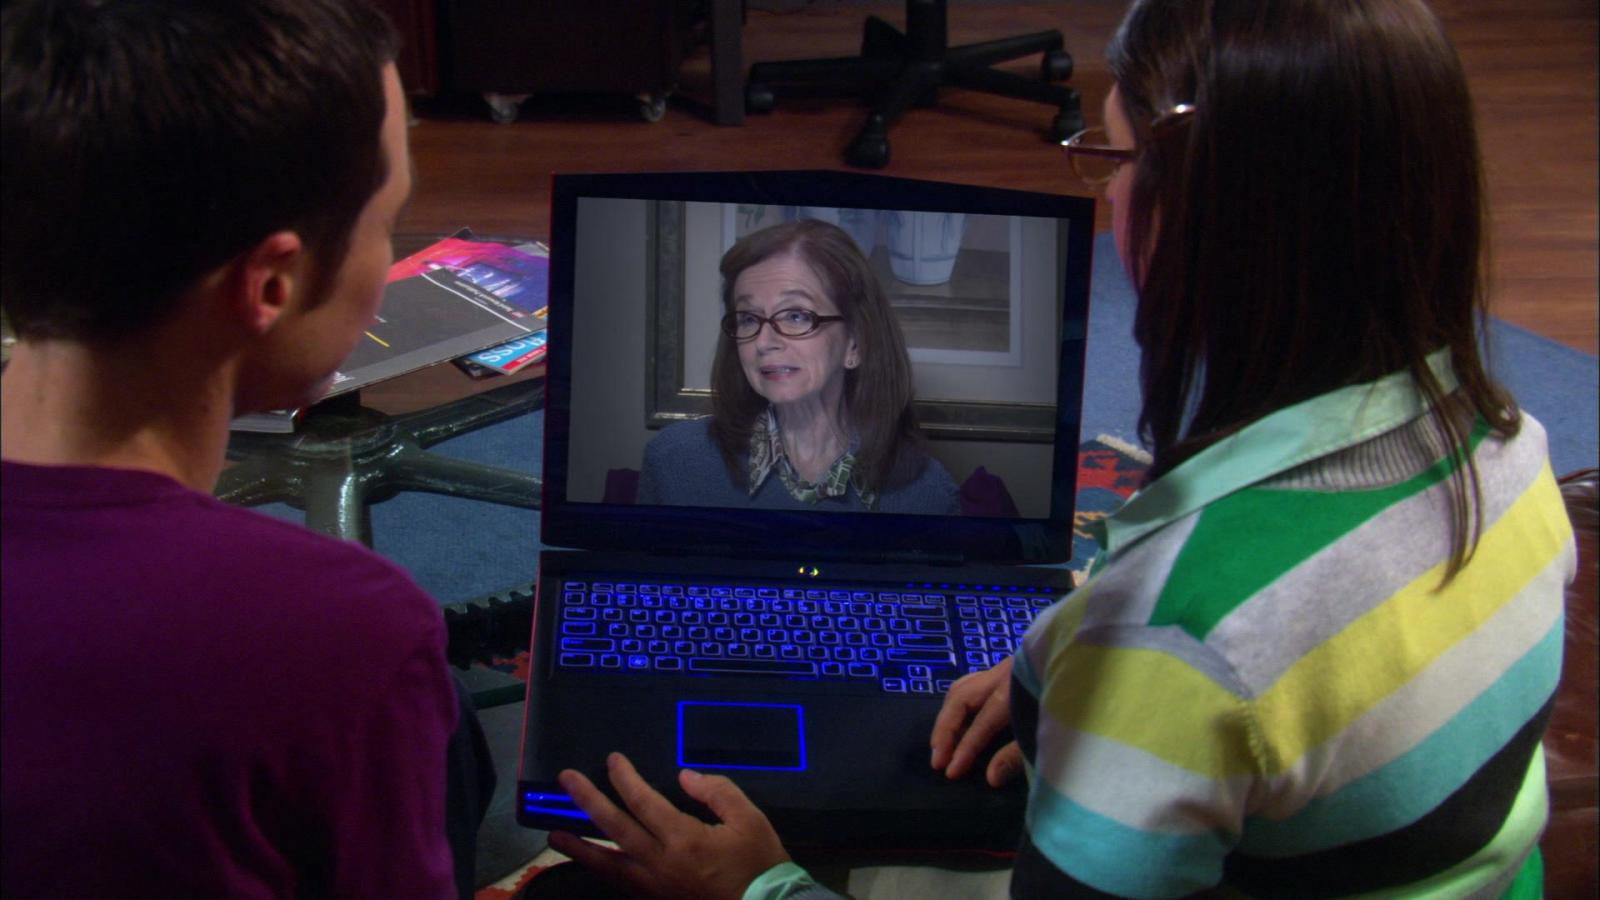 Amy's Mother Was Totally Different in TBBT, But Then Got Replaced - image 1